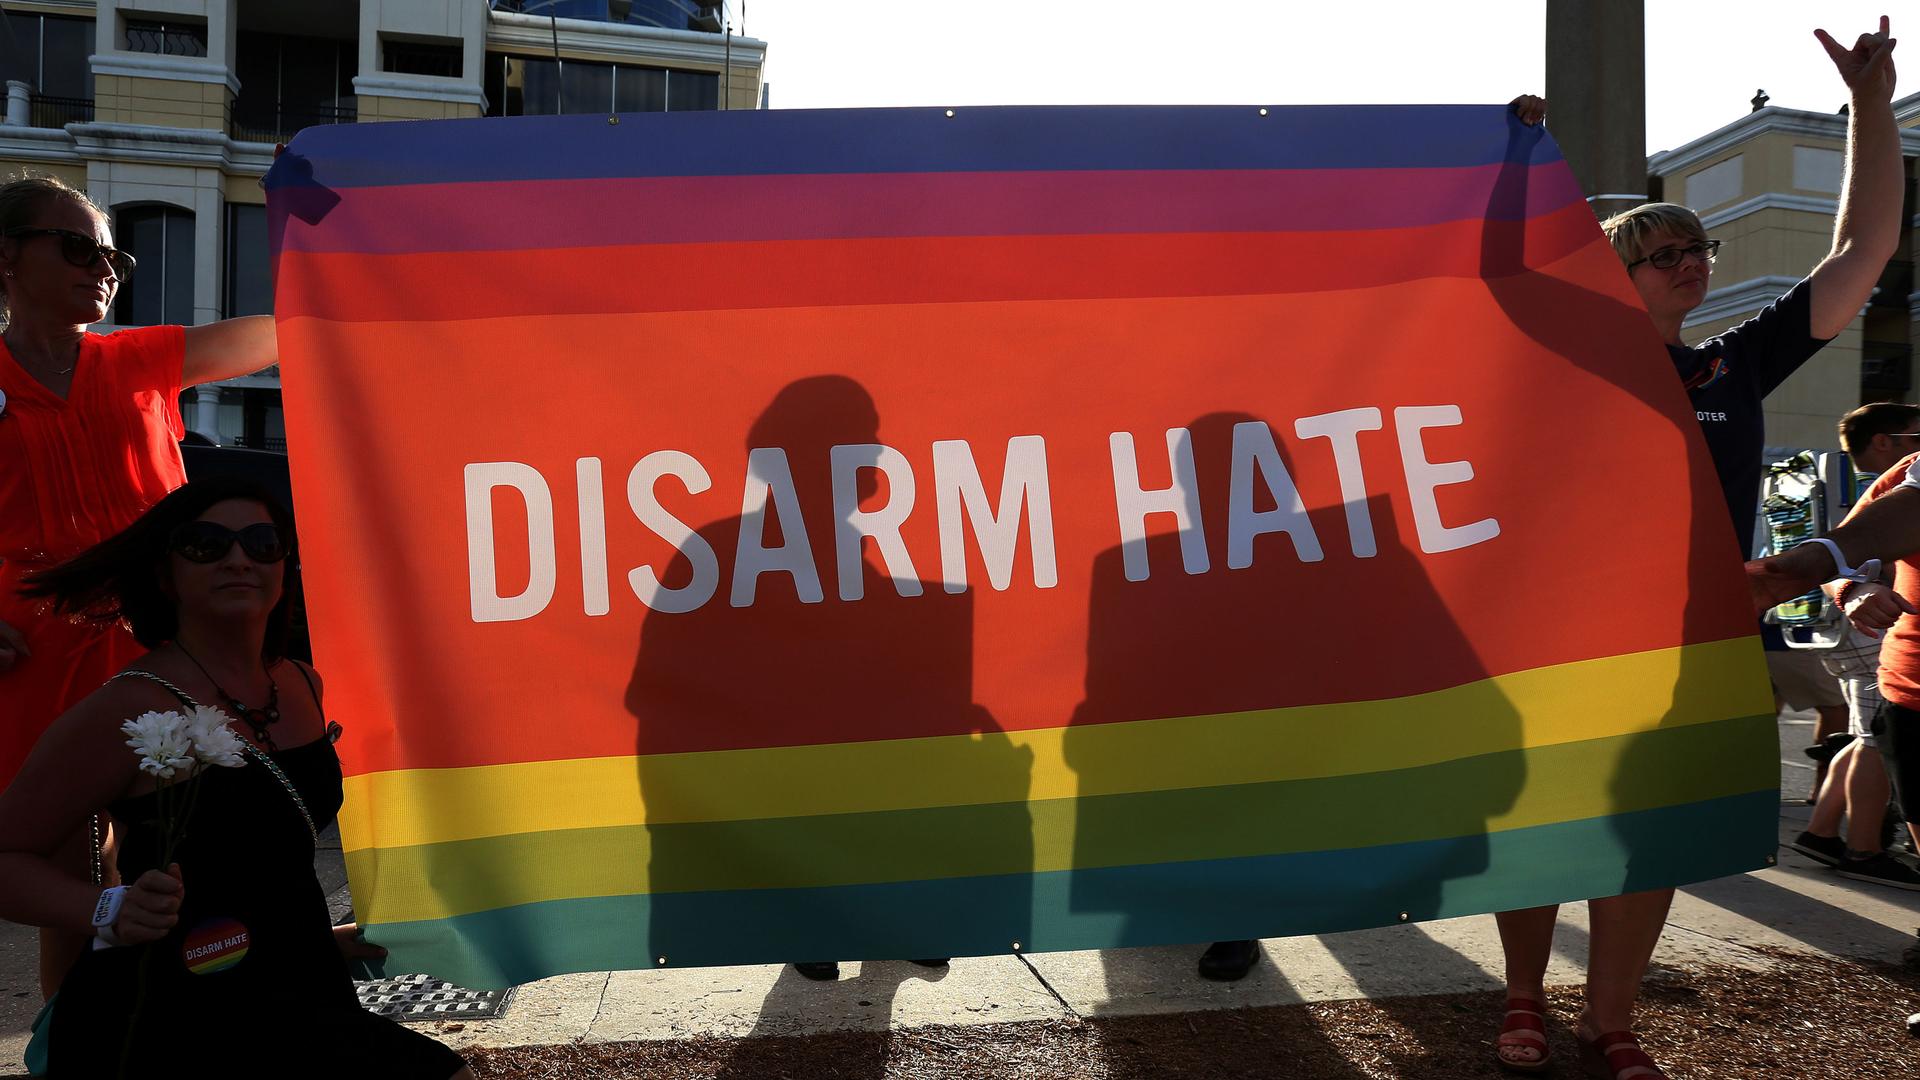 Supporters hold up a "Disarm Hate" sign to block protesters during a vigil for the Pulse night club victims following the shooting in Orlando, Florida, U.S., June 19, 2016.